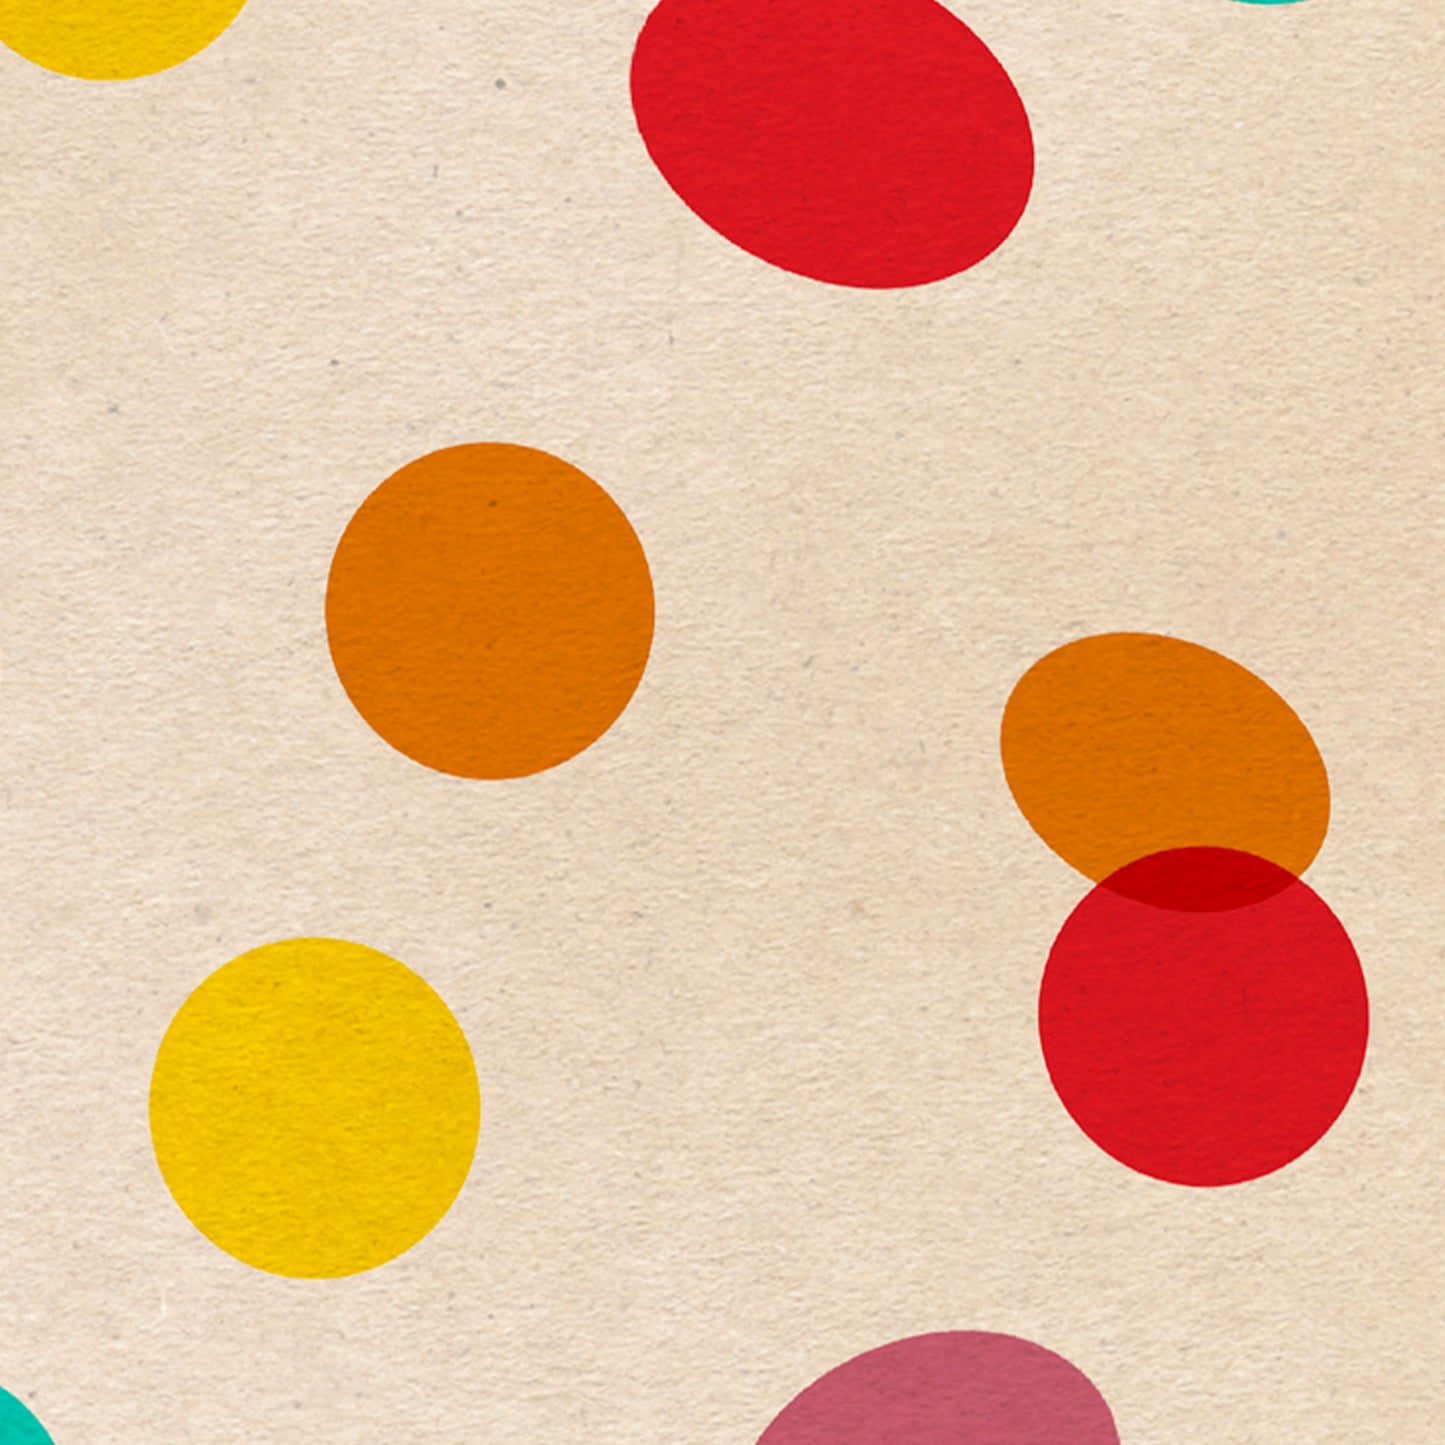 Close-up detail of the 'Eivissa Bubbles' minimalist poster by Cha™, showcasing its artistic intricacies